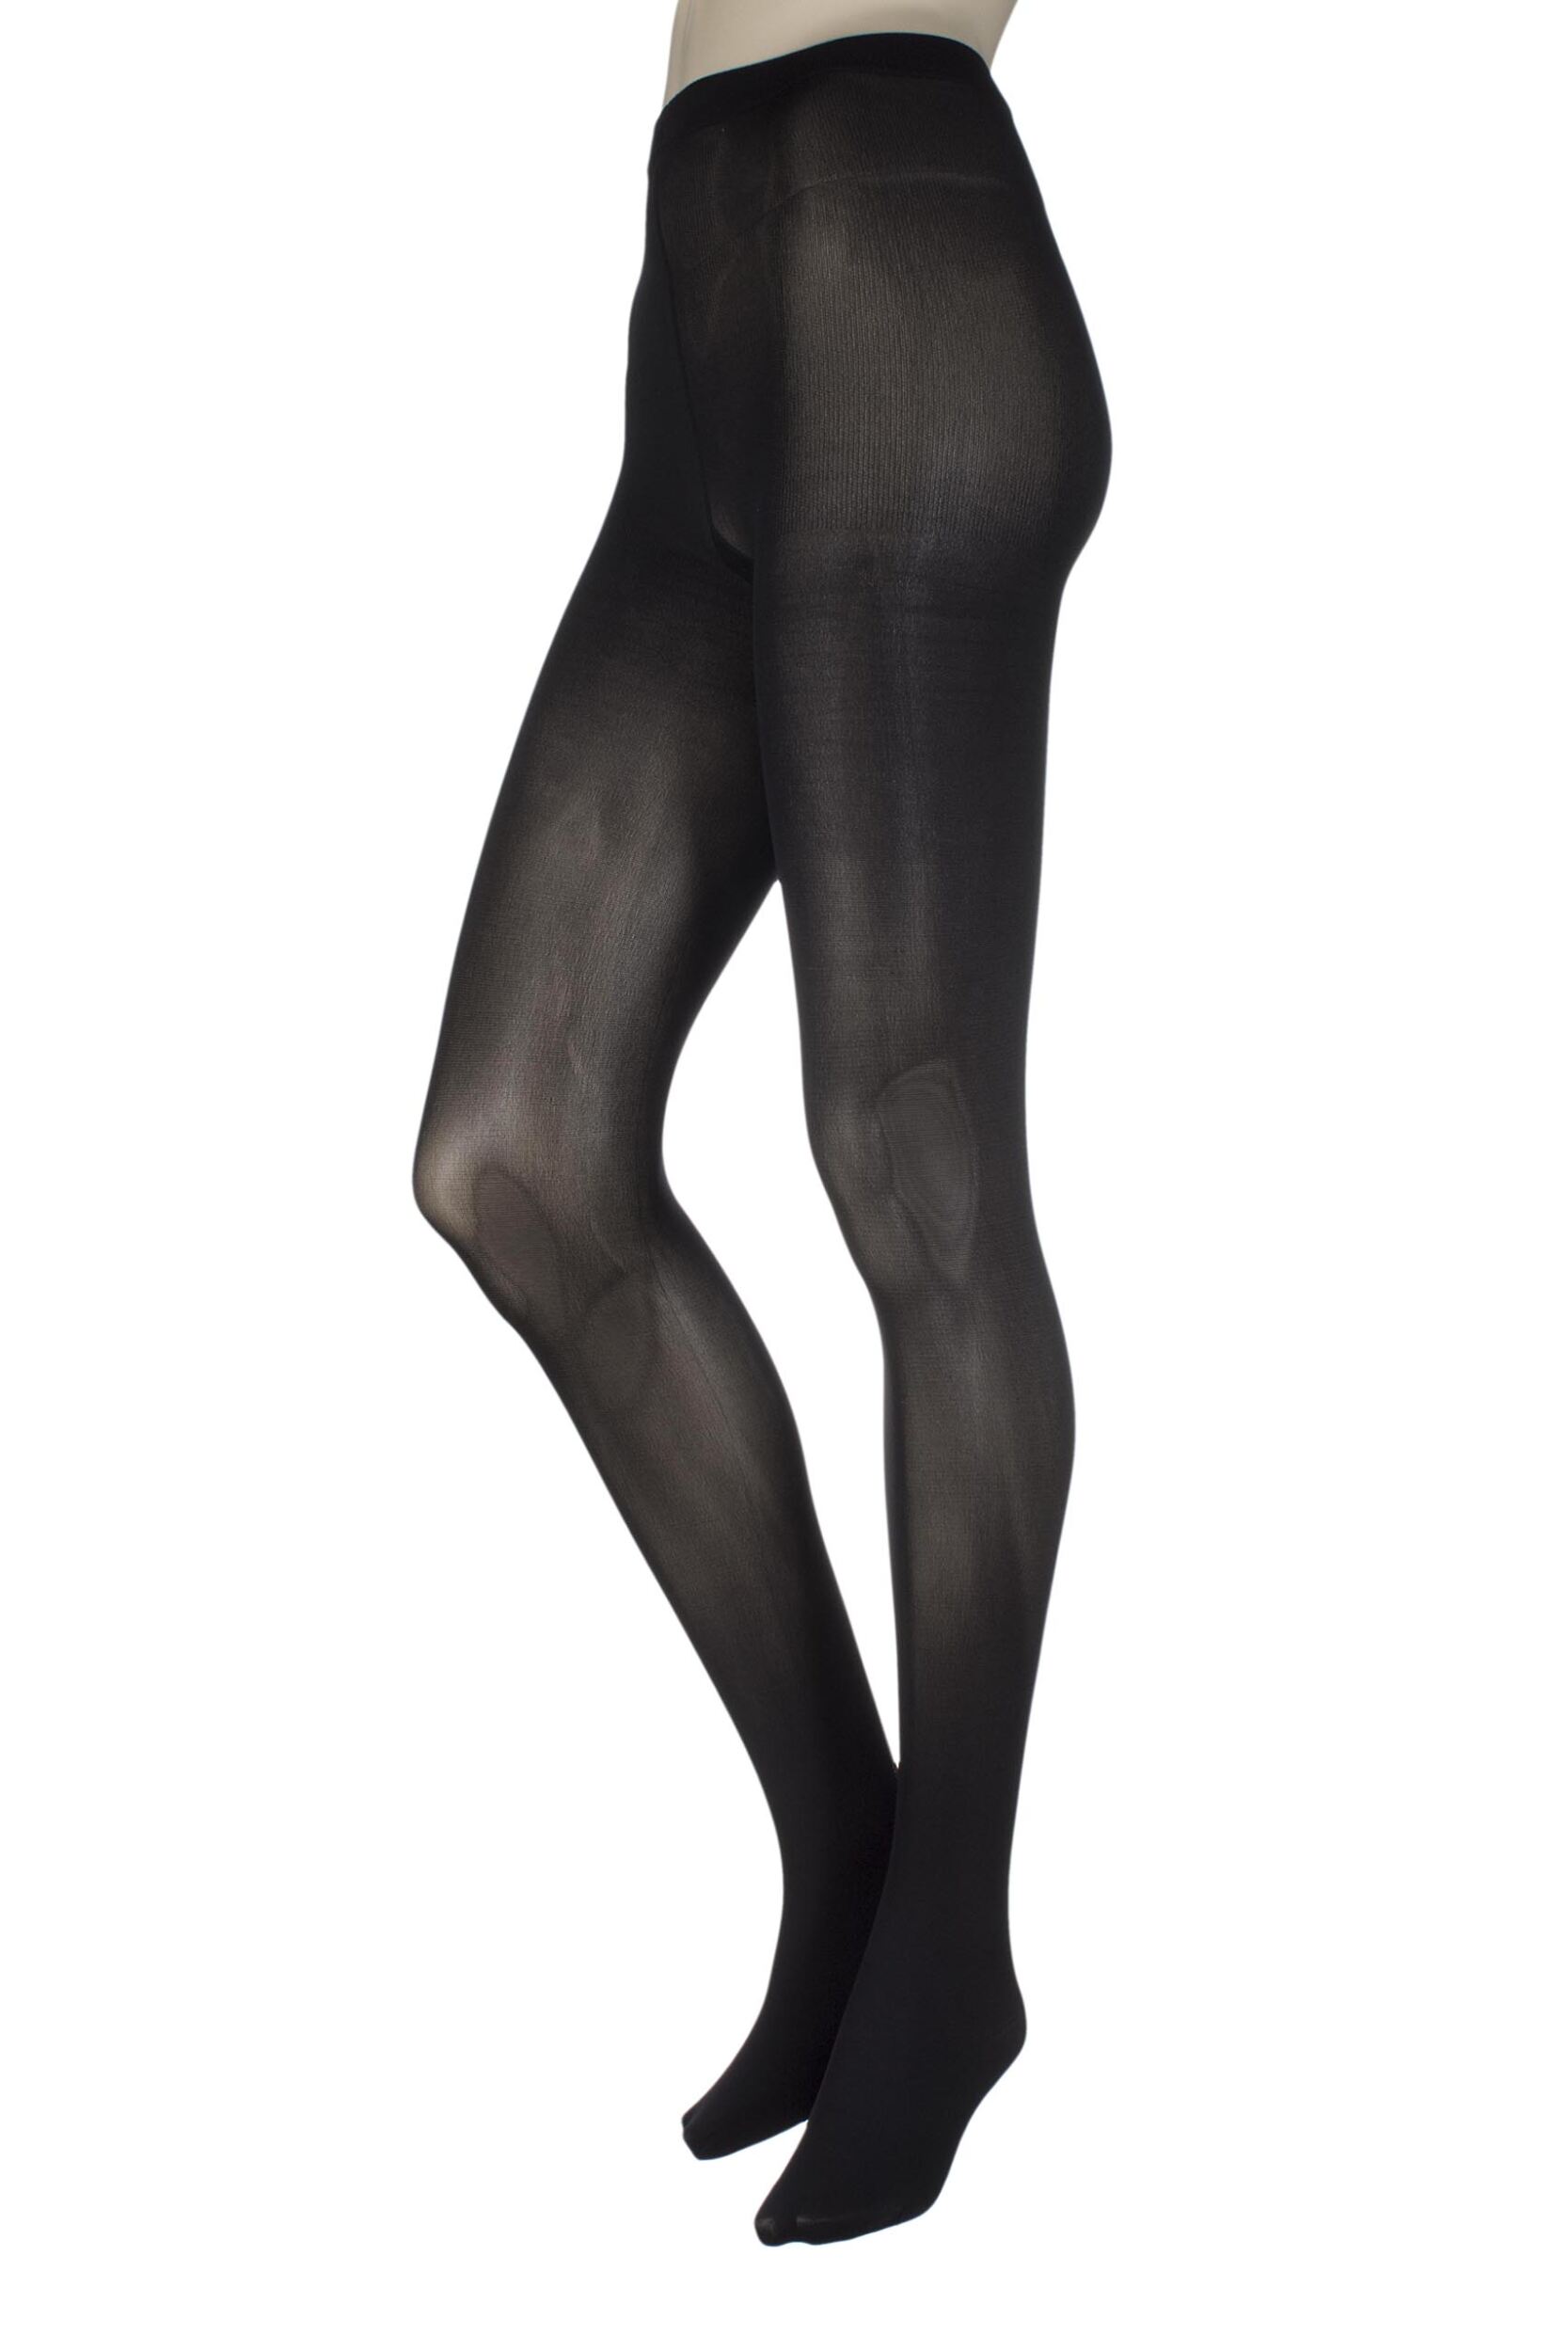 Image of Ladies 1 Pair Trasparenze Energy Compression Tights